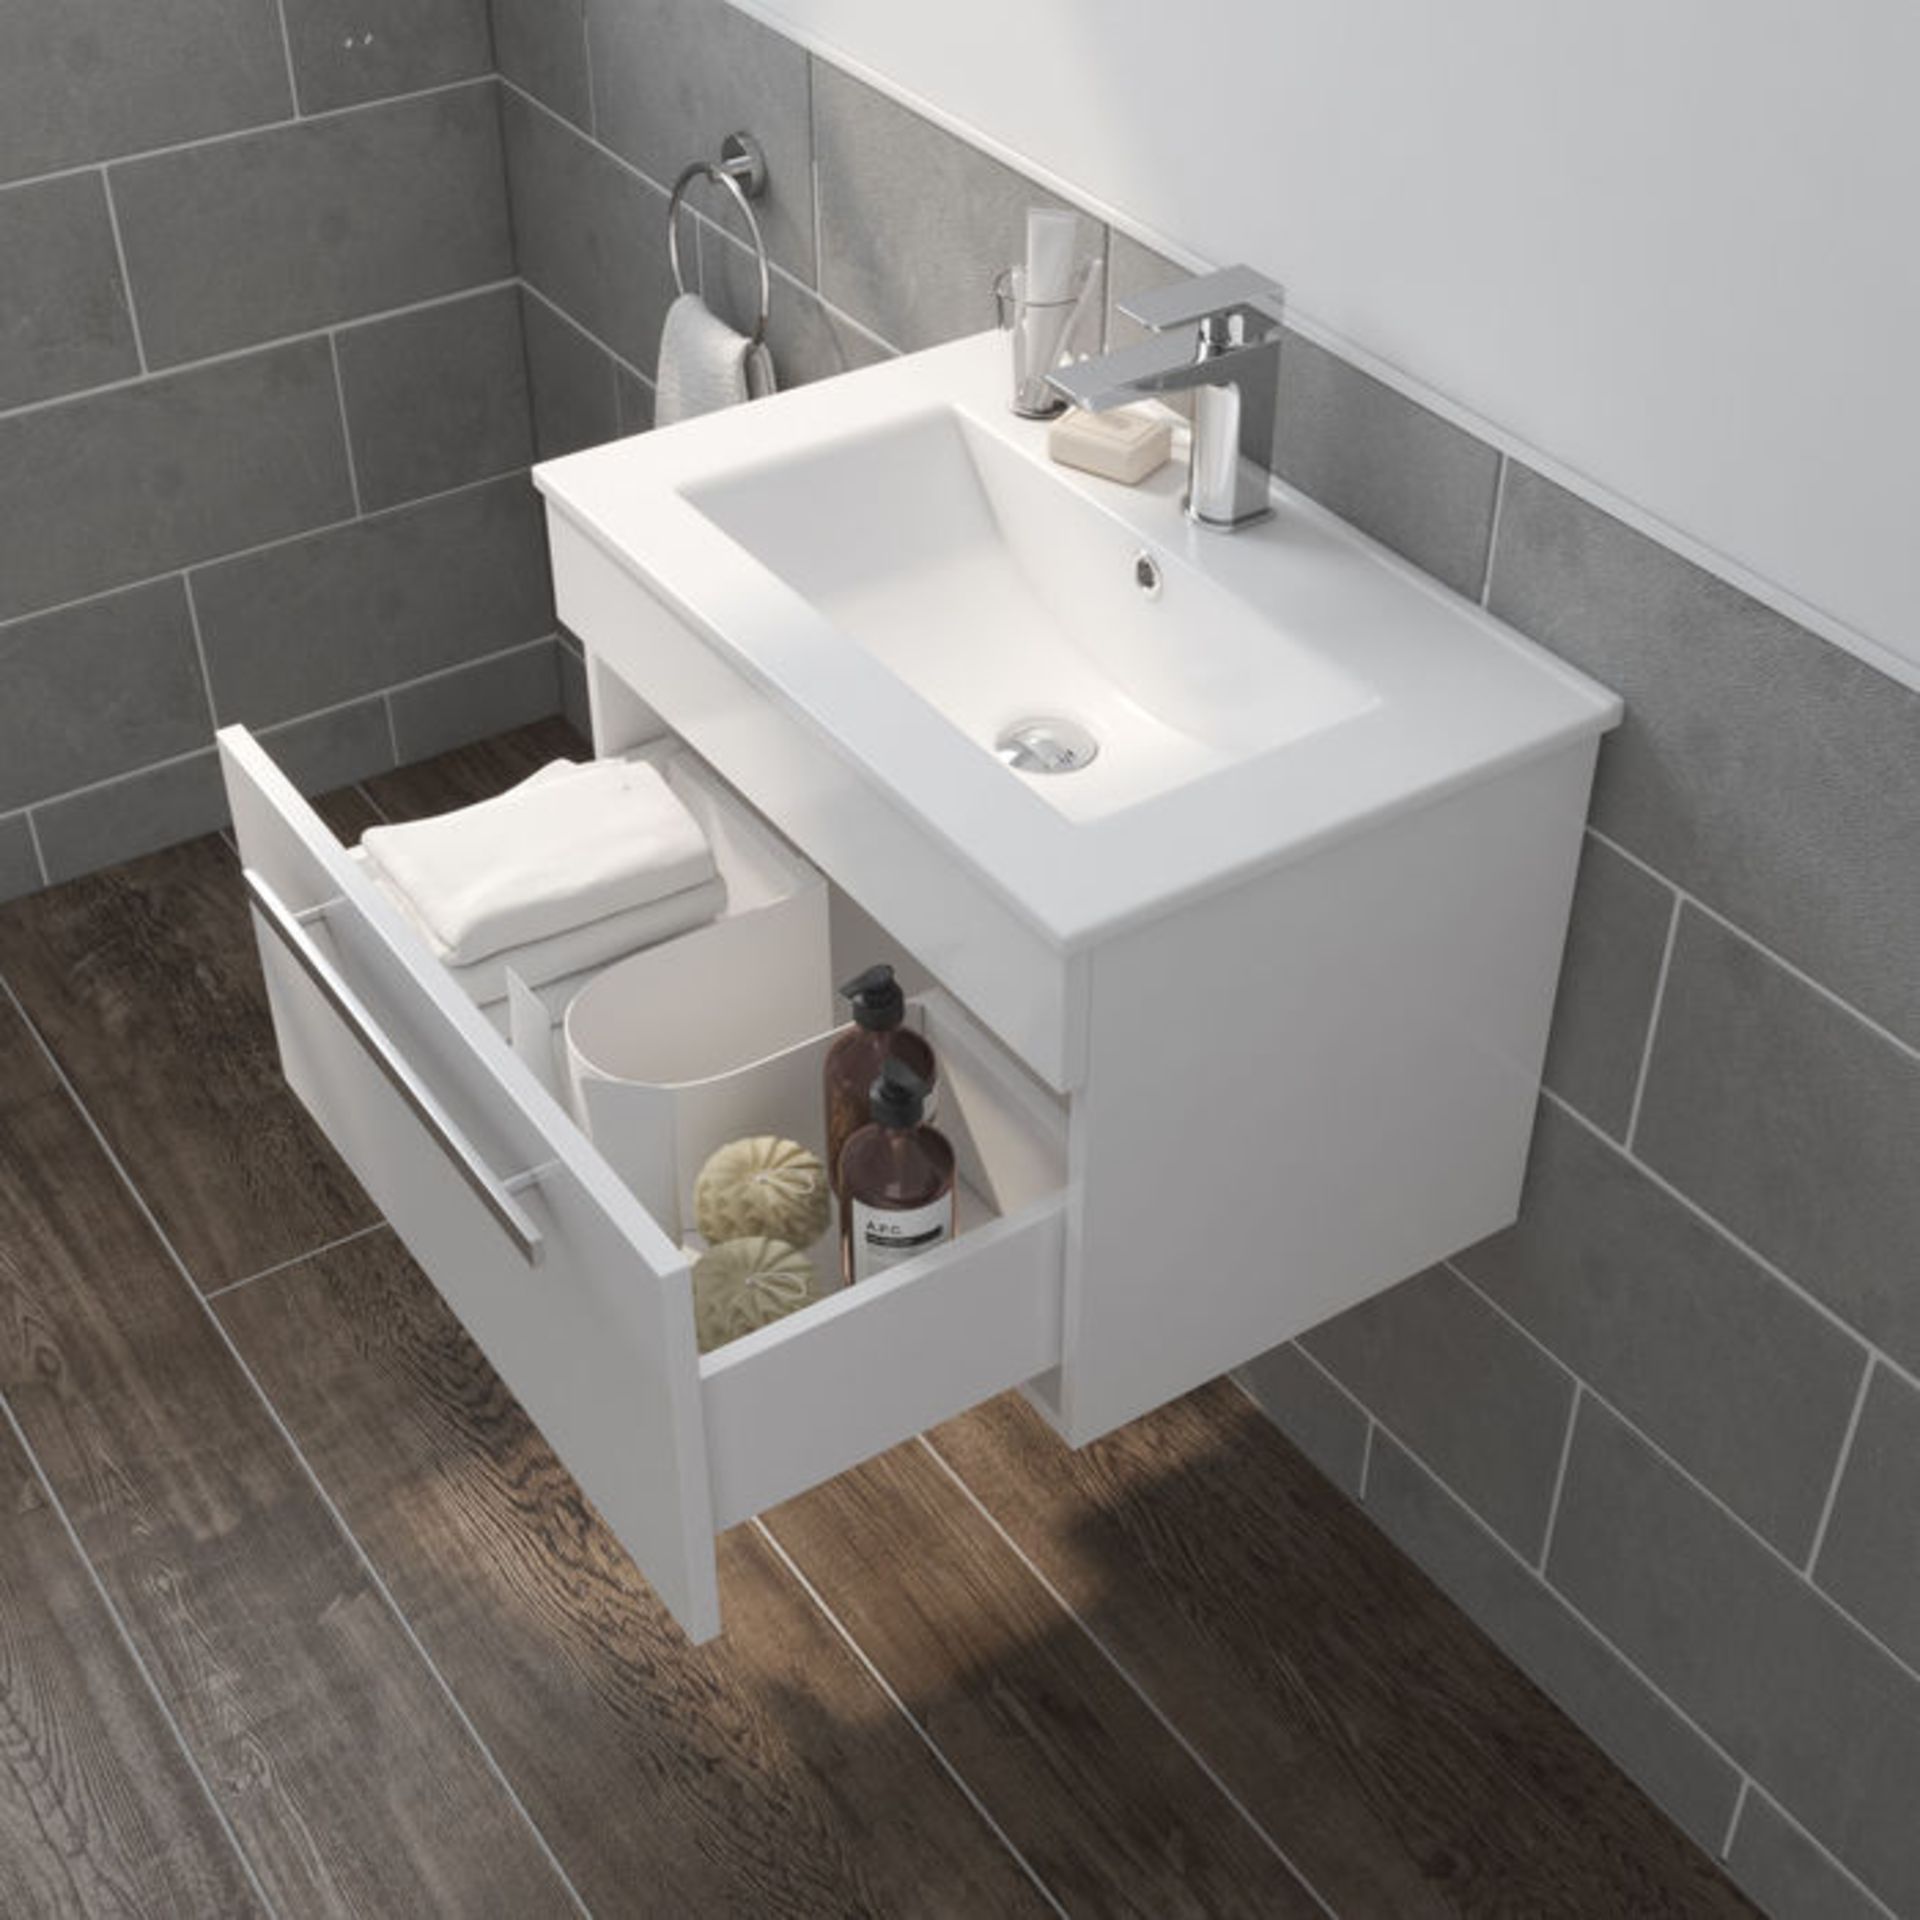 (DW42) 600mm Avon High Gloss White Sink Cabinet - Wall Hung. RRP £499.99. Comes complete with ... - Image 2 of 4